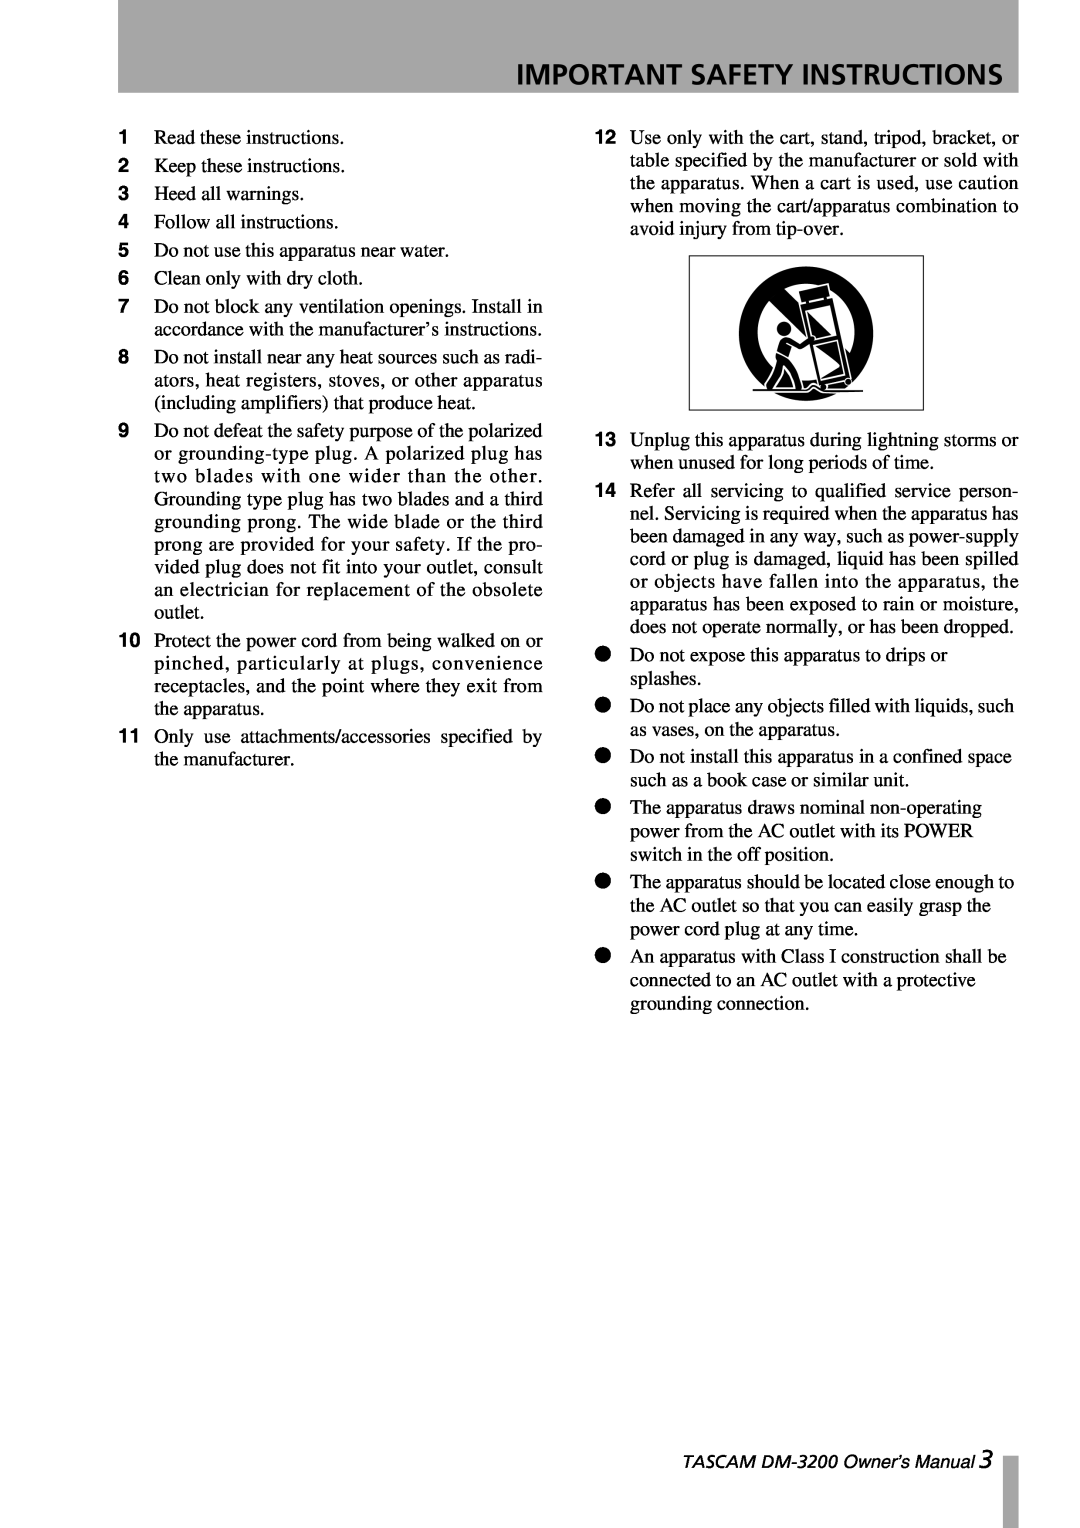 Tascam DM-3200 owner manual Important Safety Instructions 